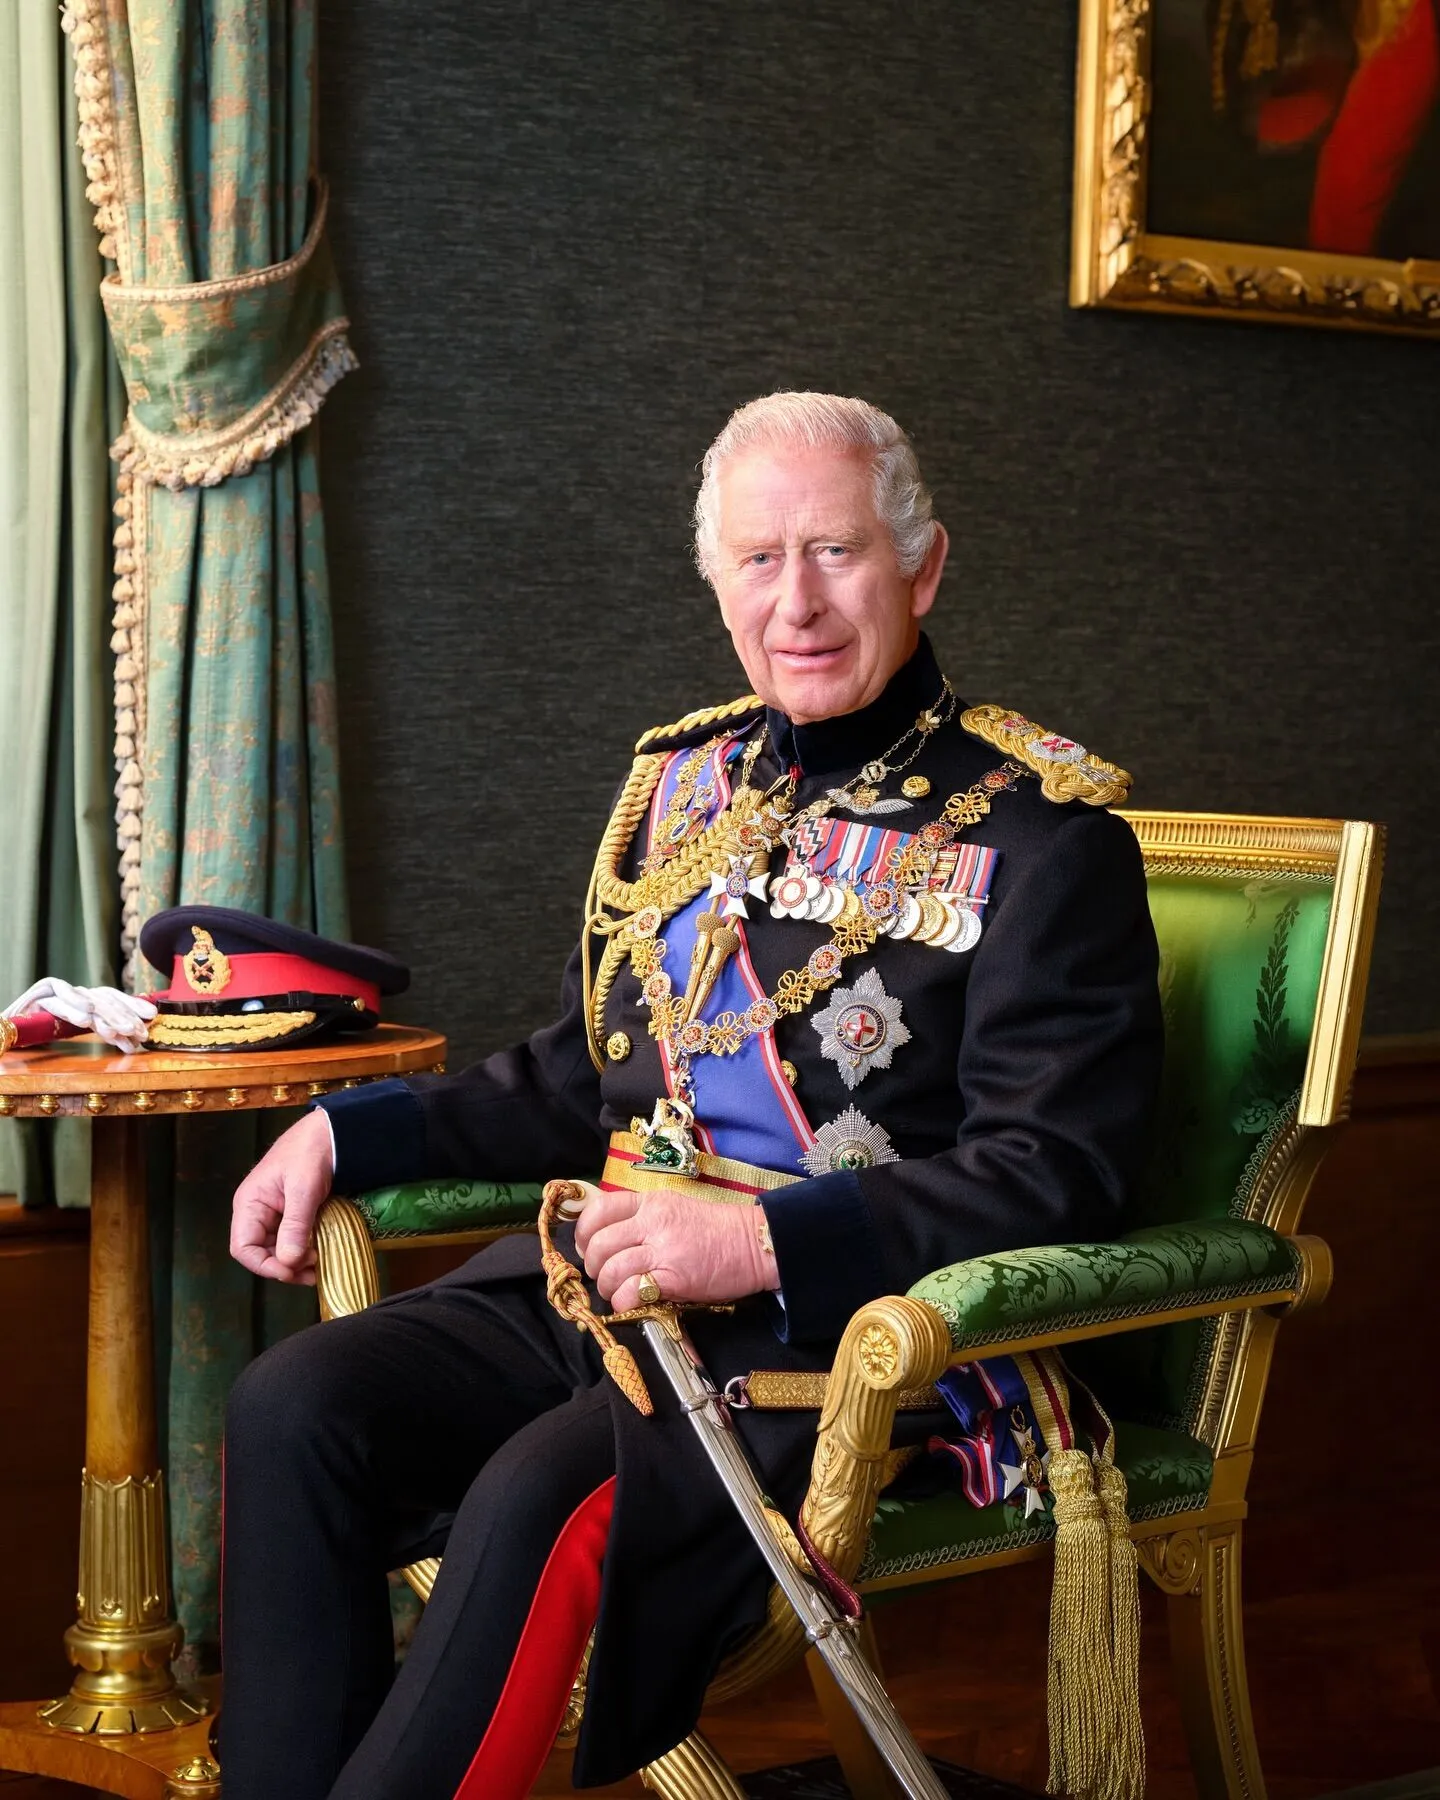 A new official portrait of King Charles III of Great Britain has been published. Photo